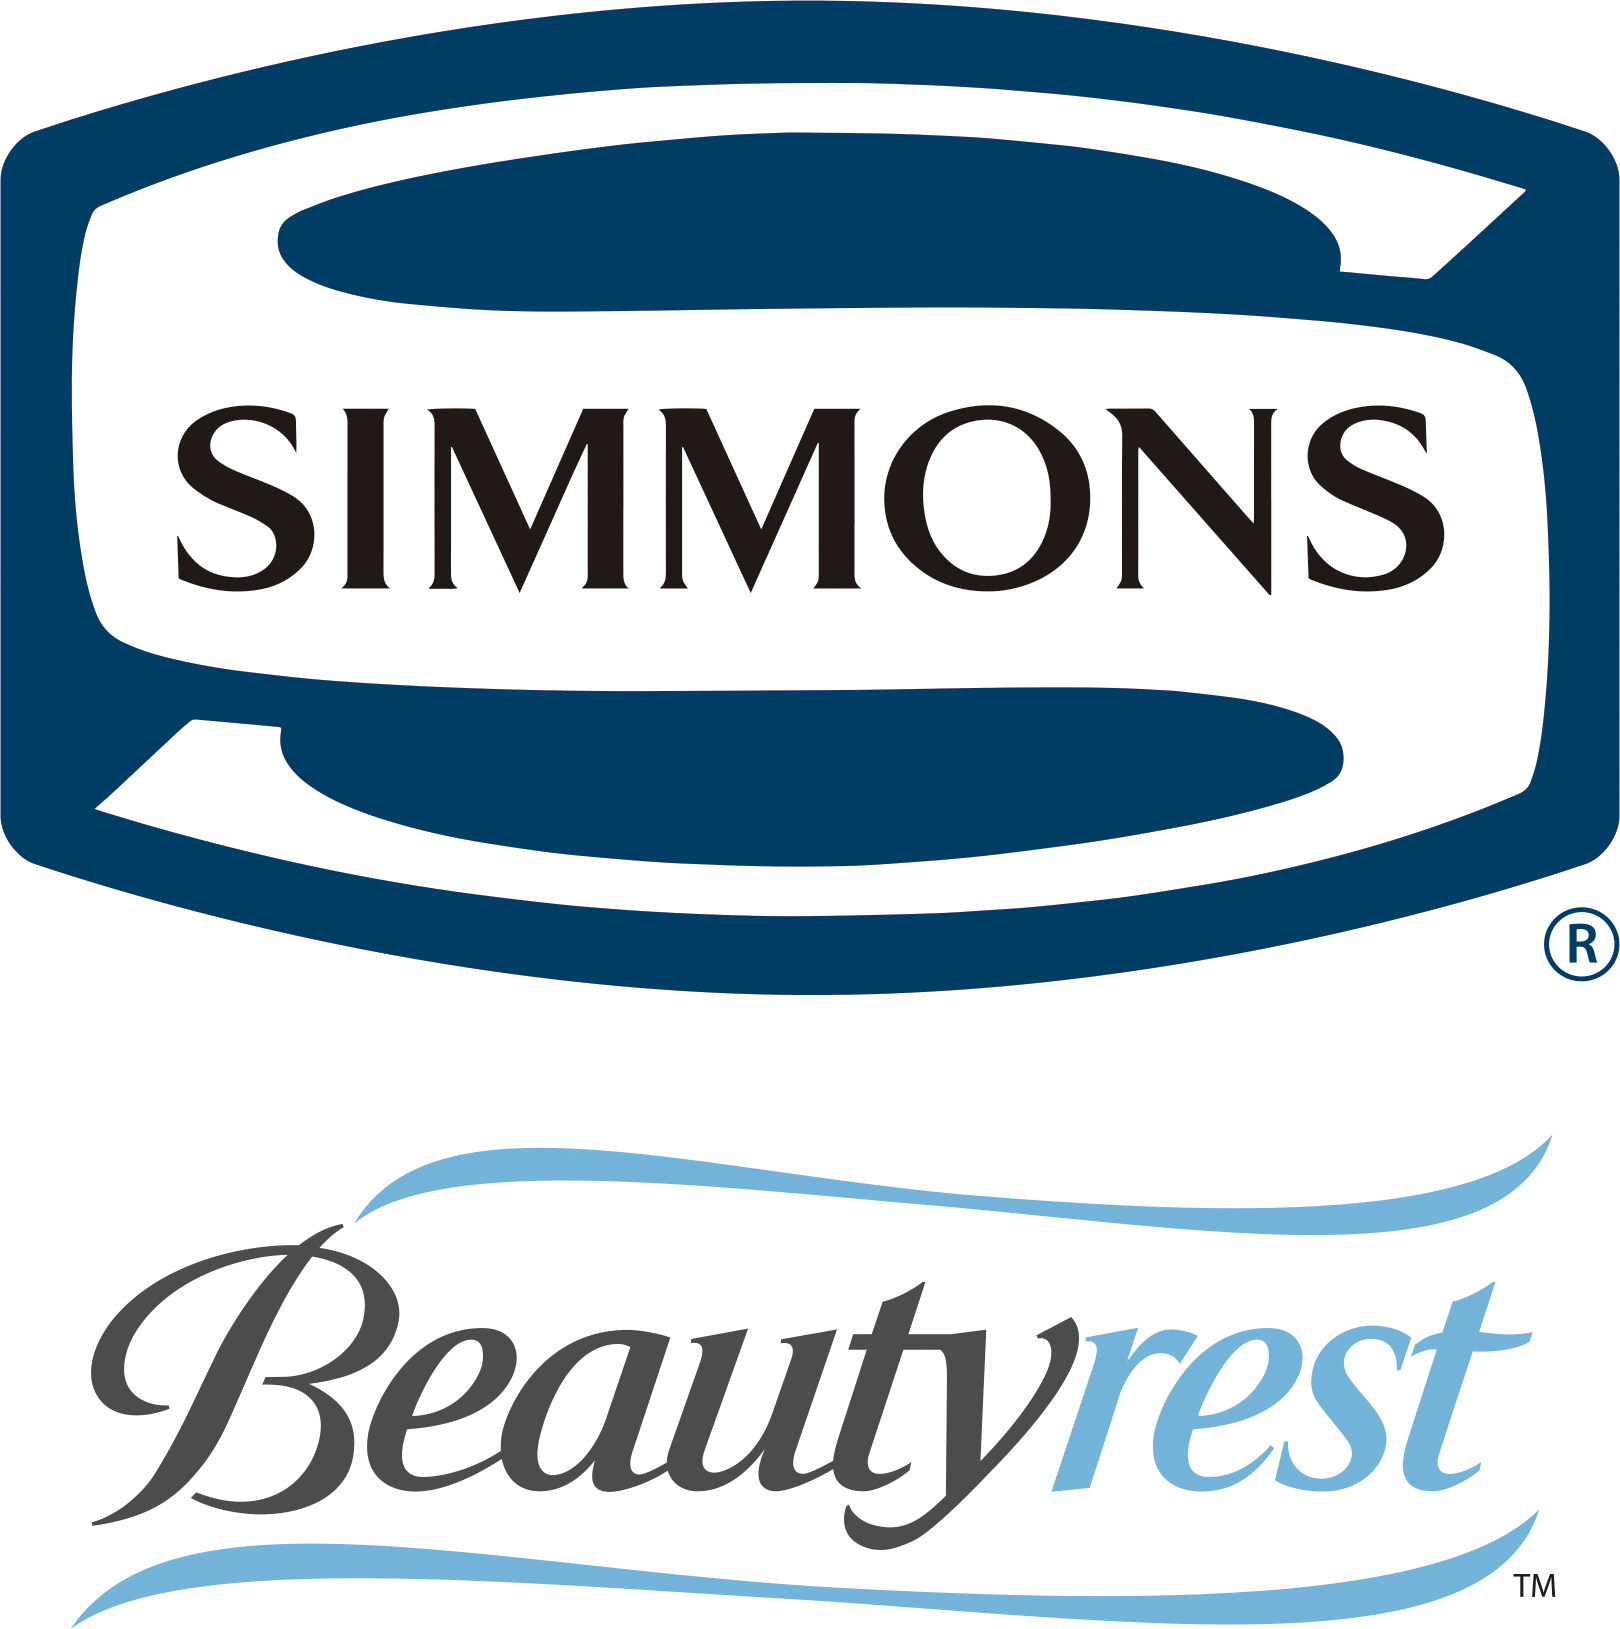 Simmons Beauty Rest - Simmons Bedding Company Clipart (1620x1629), Png Download